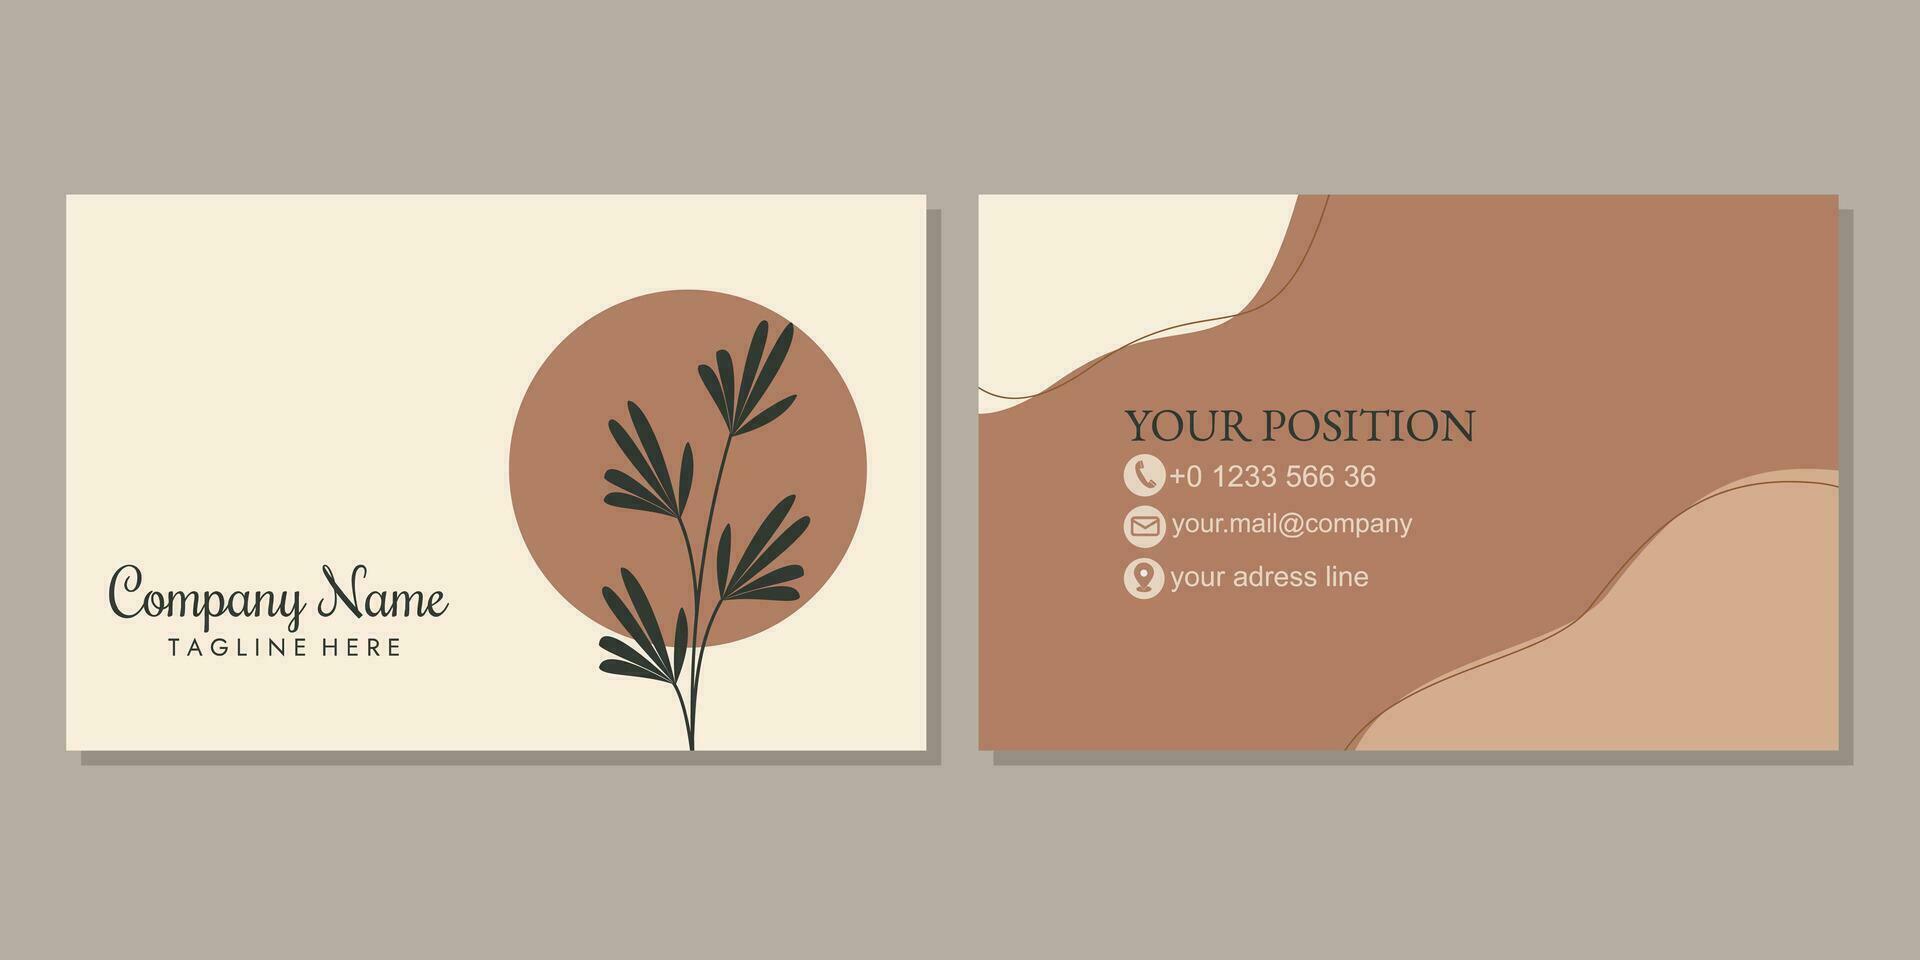 business card design for corporate identity. simple stylish card with hand drawn floral elements vector